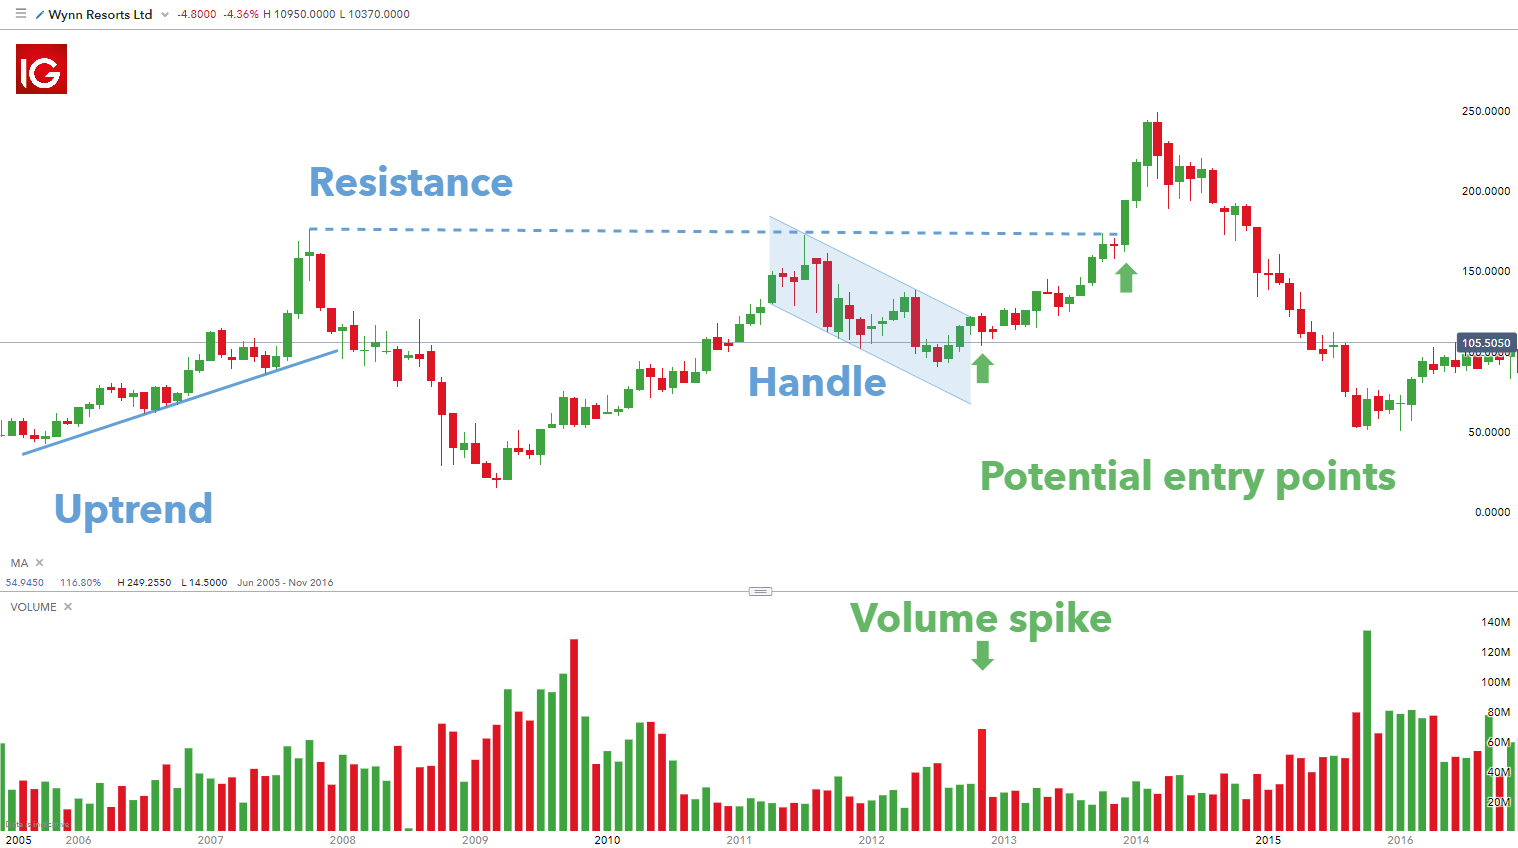 Cup and Handle Pattern - Example, Target, How to Use & Trade